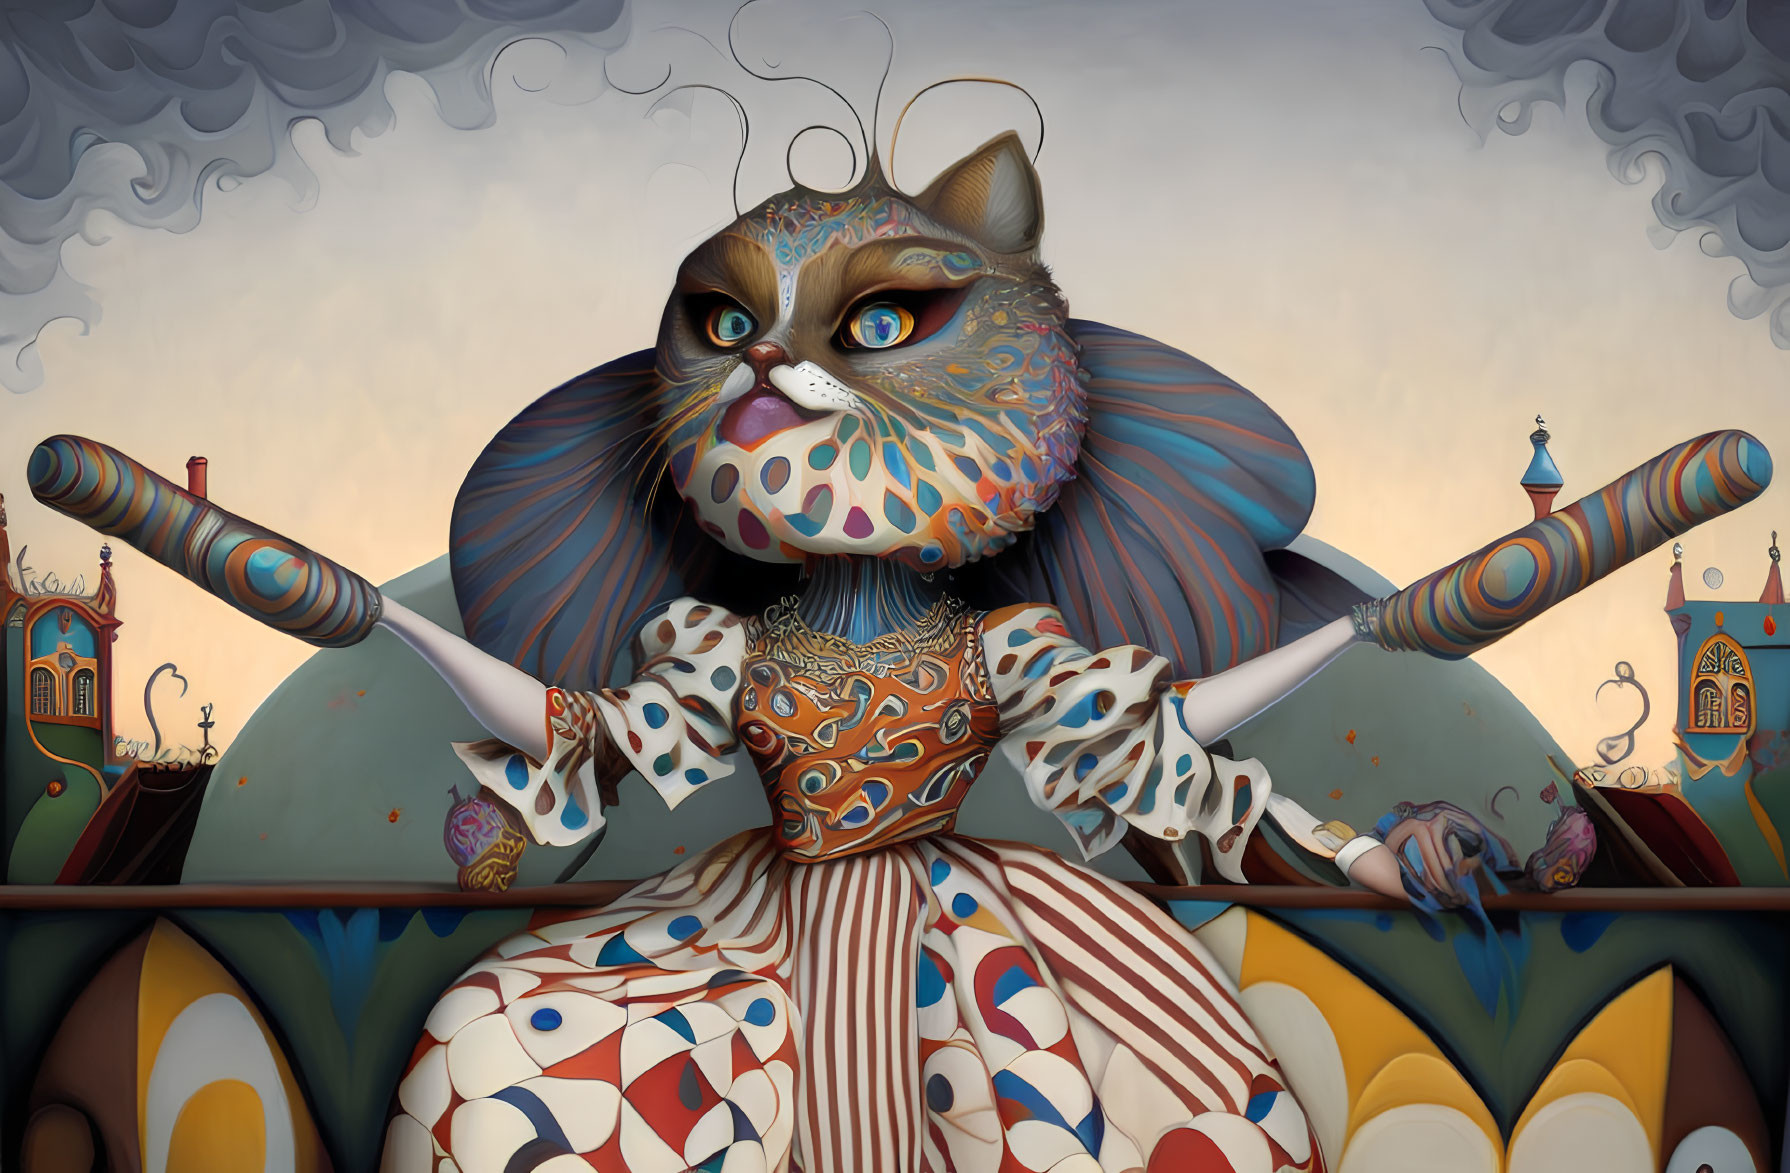 Anthropomorphic cat playing drums in surreal cityscape